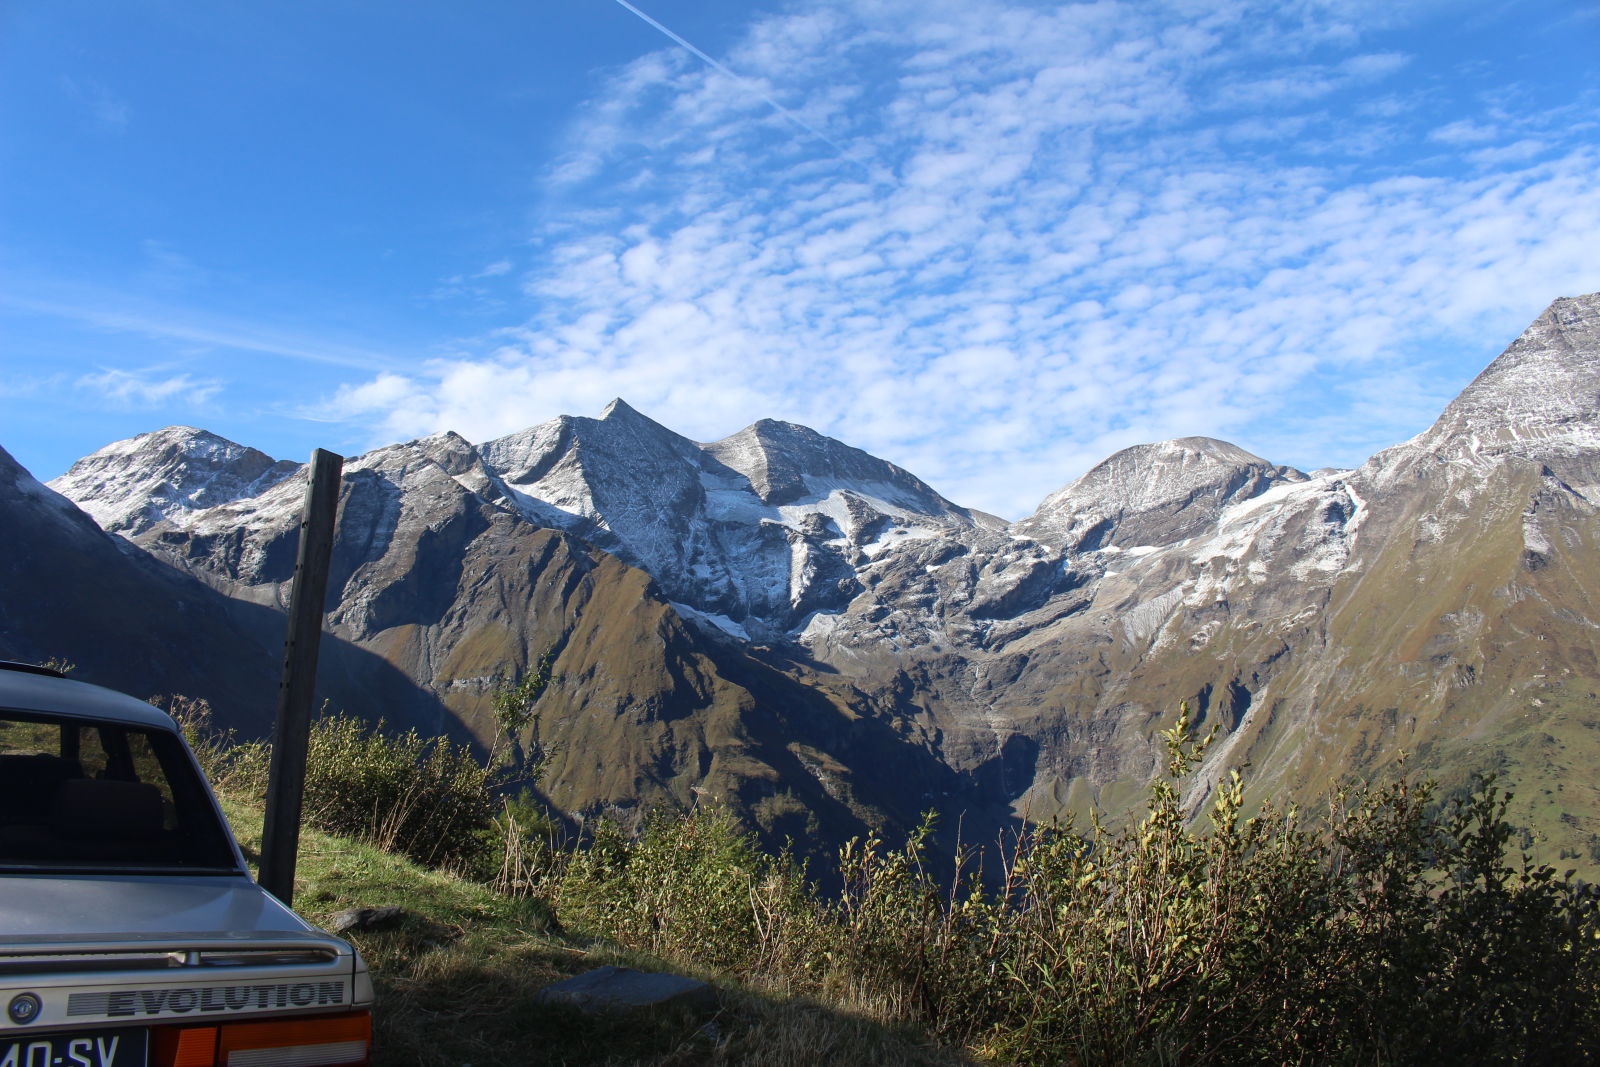 The view from the foot of the Großglockner, including a bit of 505